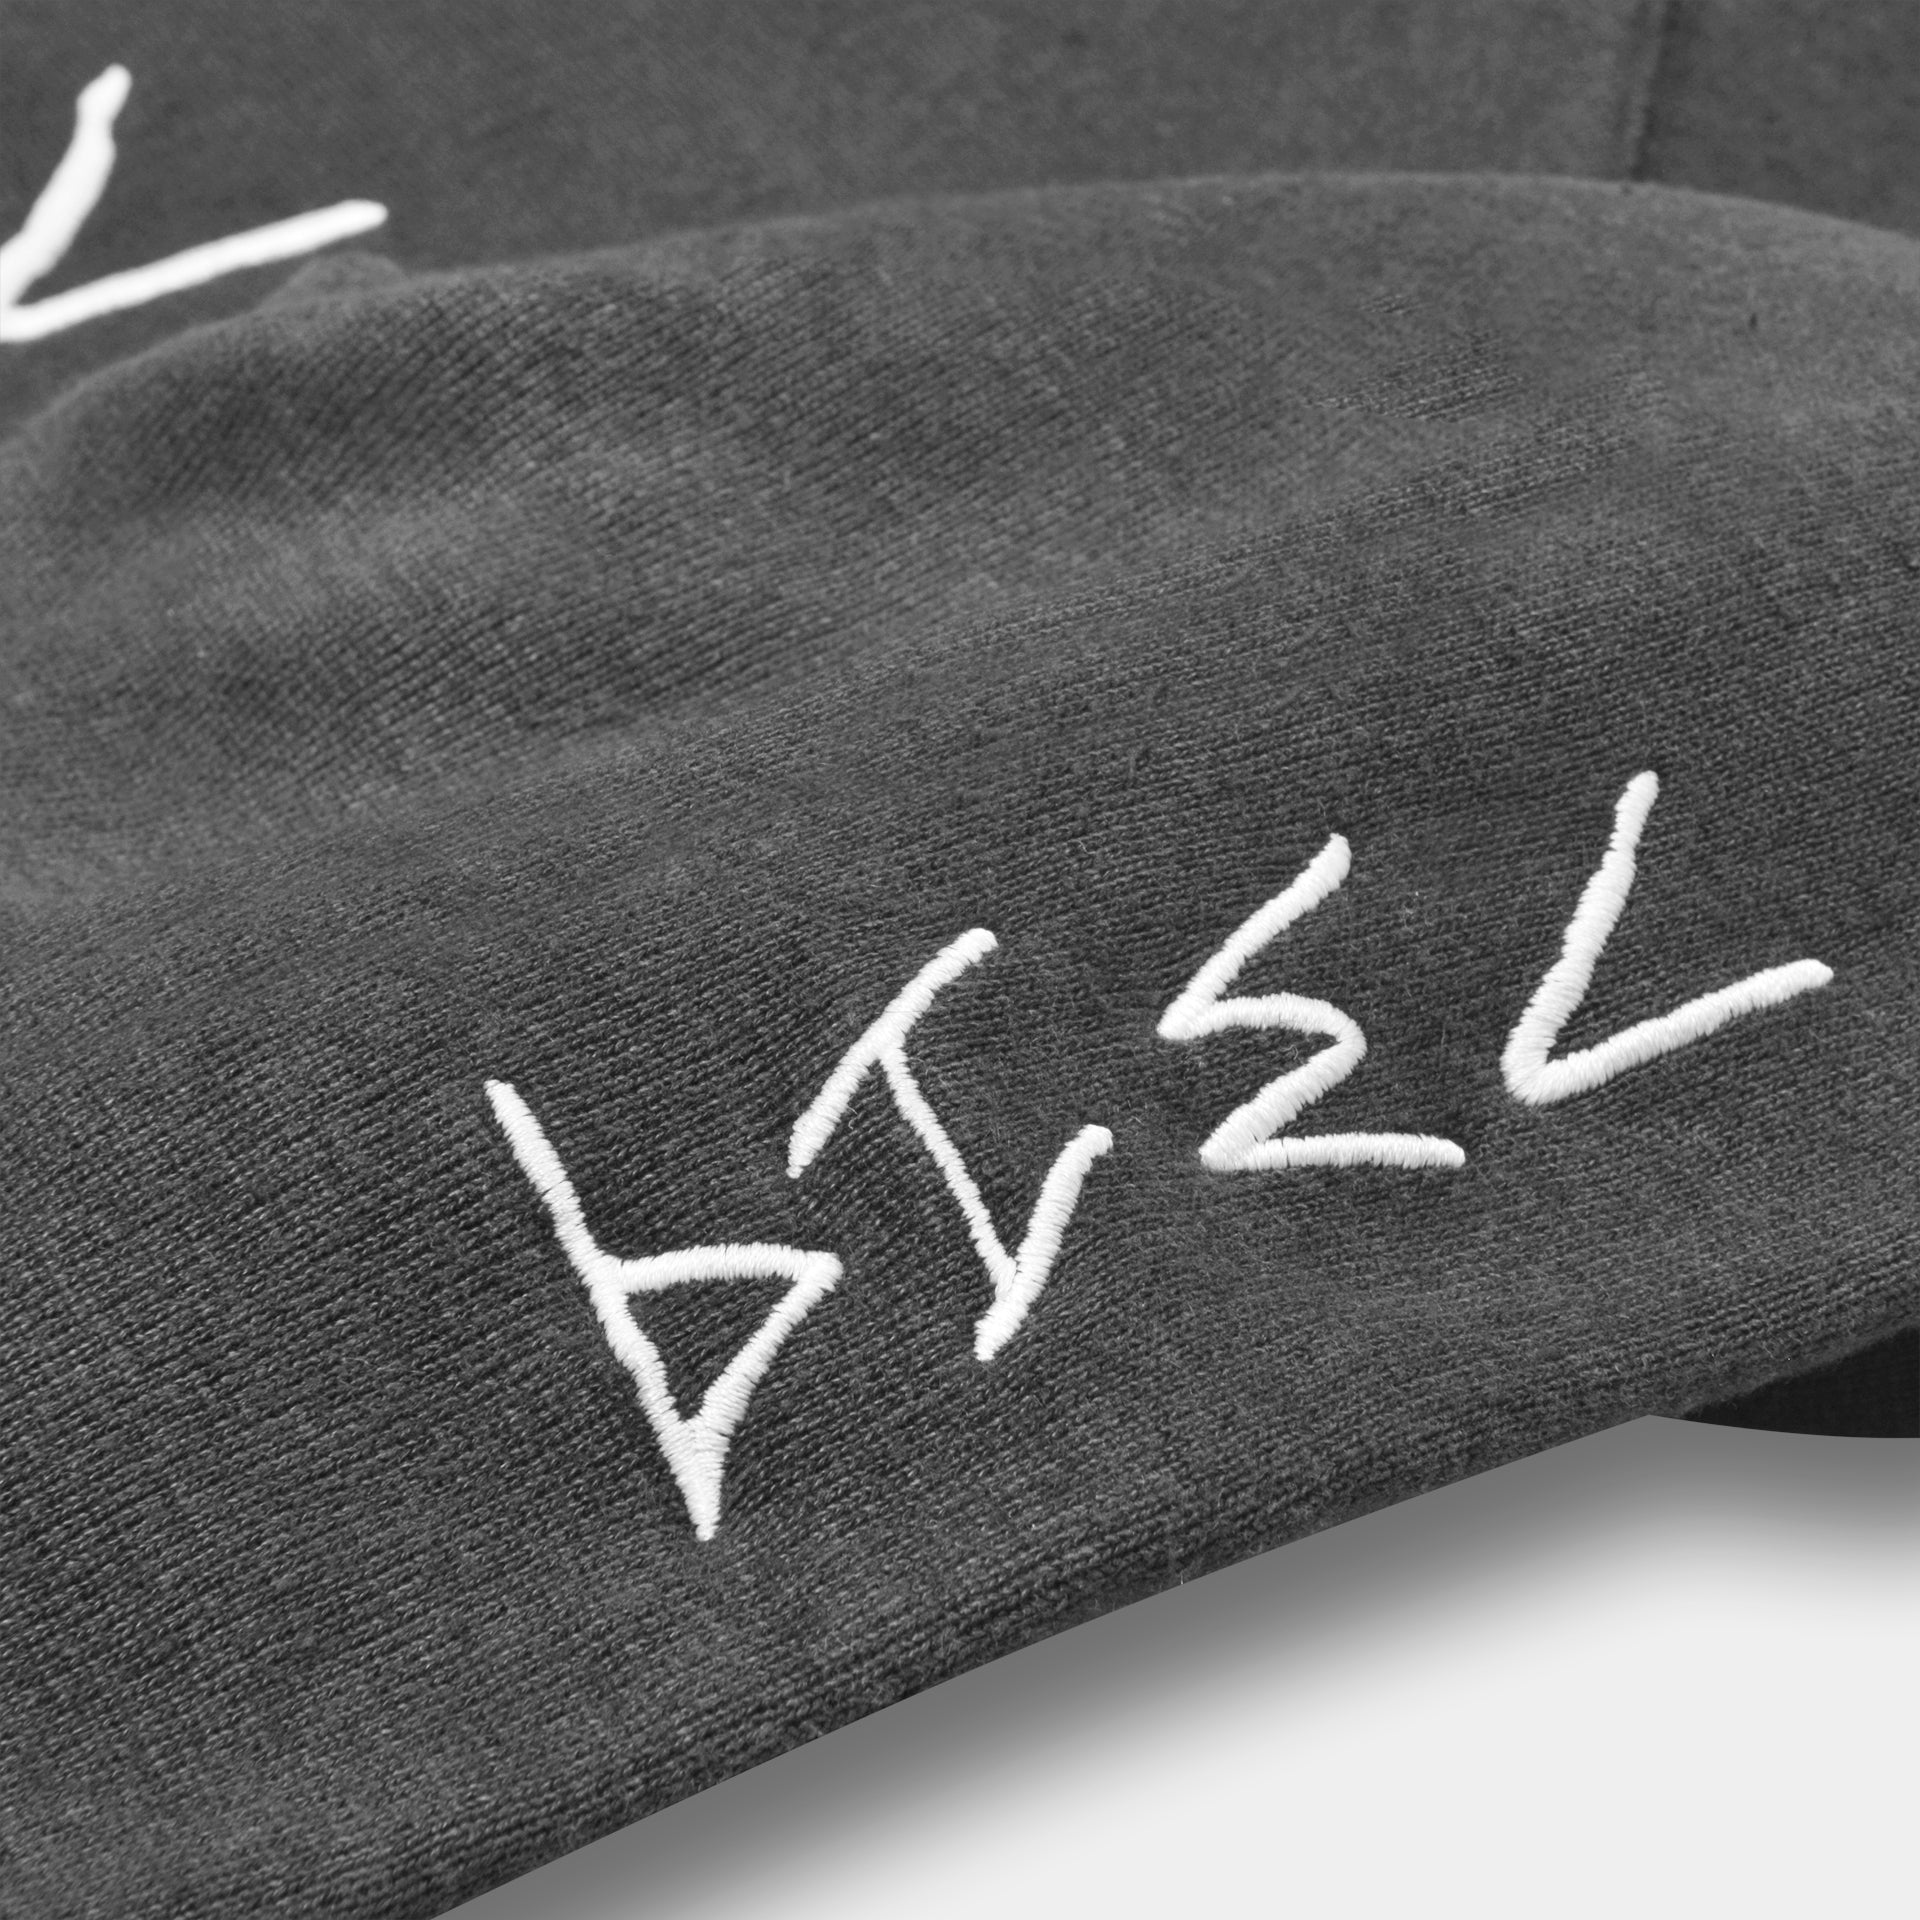 Charcoal grey hemp hoodie. Close up of white embroidered 7319 logo. High quality natural organic materials. 